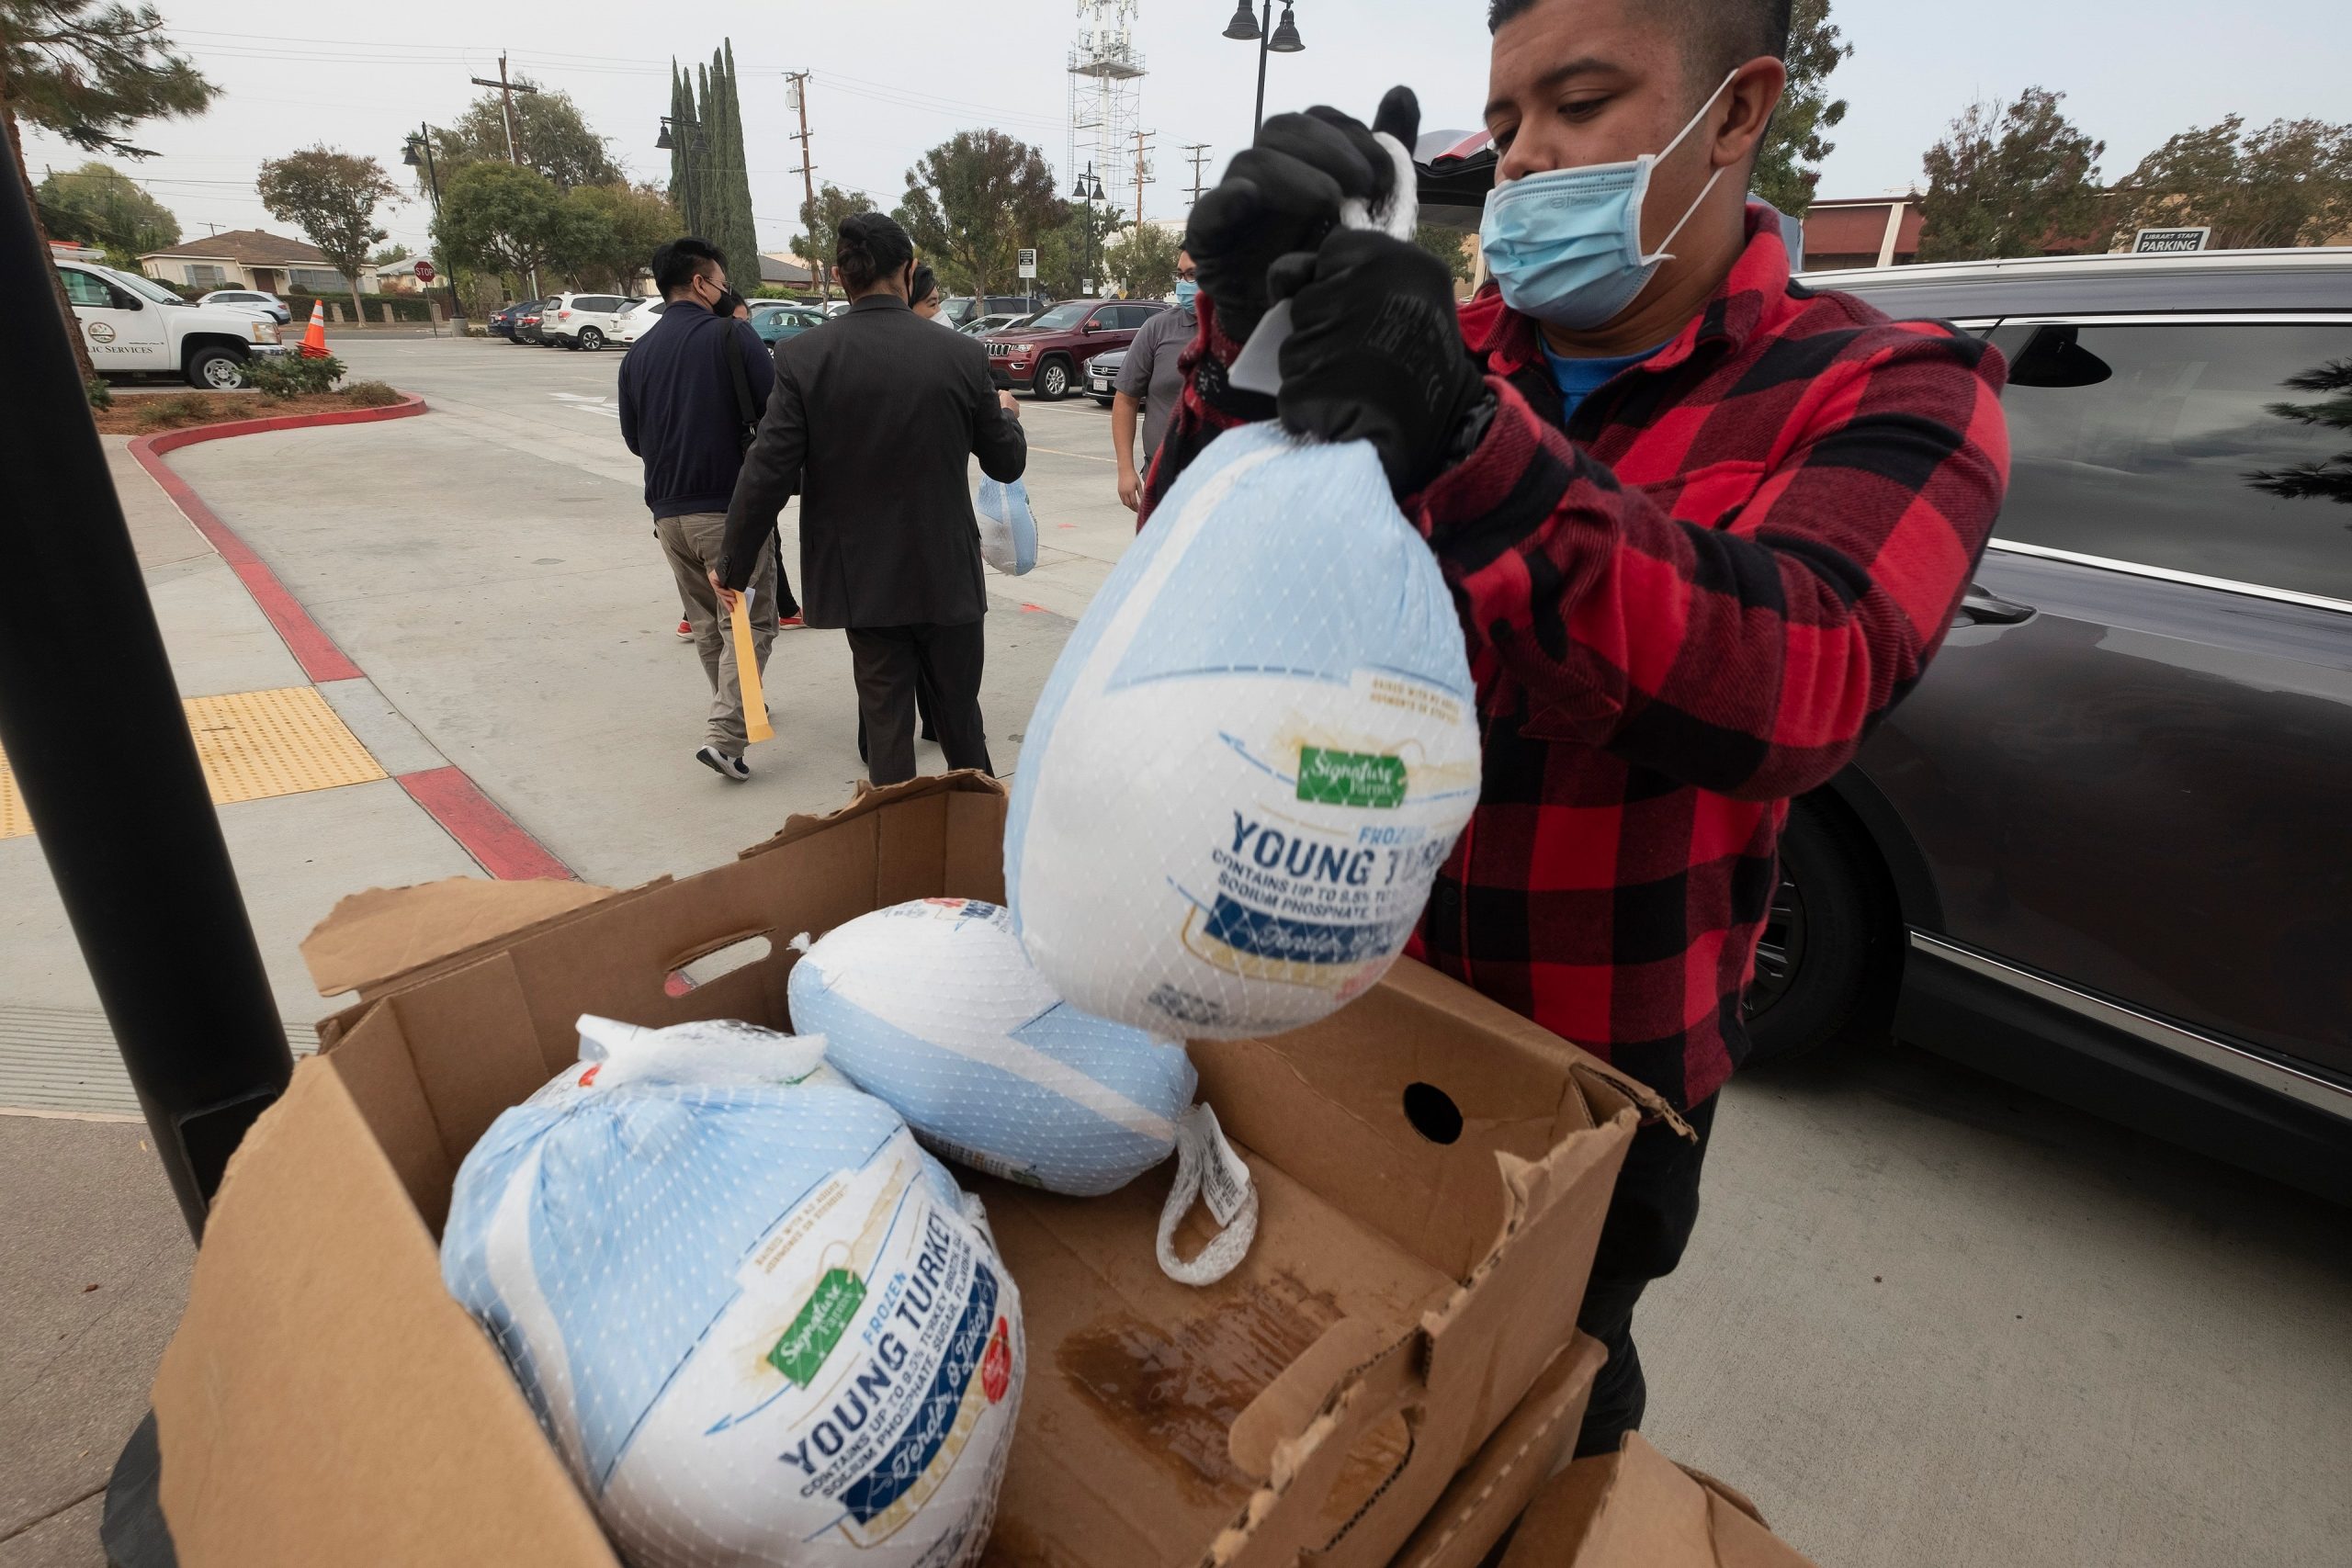 Cannabis Industry Comes Together To Offer Free Turkeys, Canned Food Drives for Thanksgiving